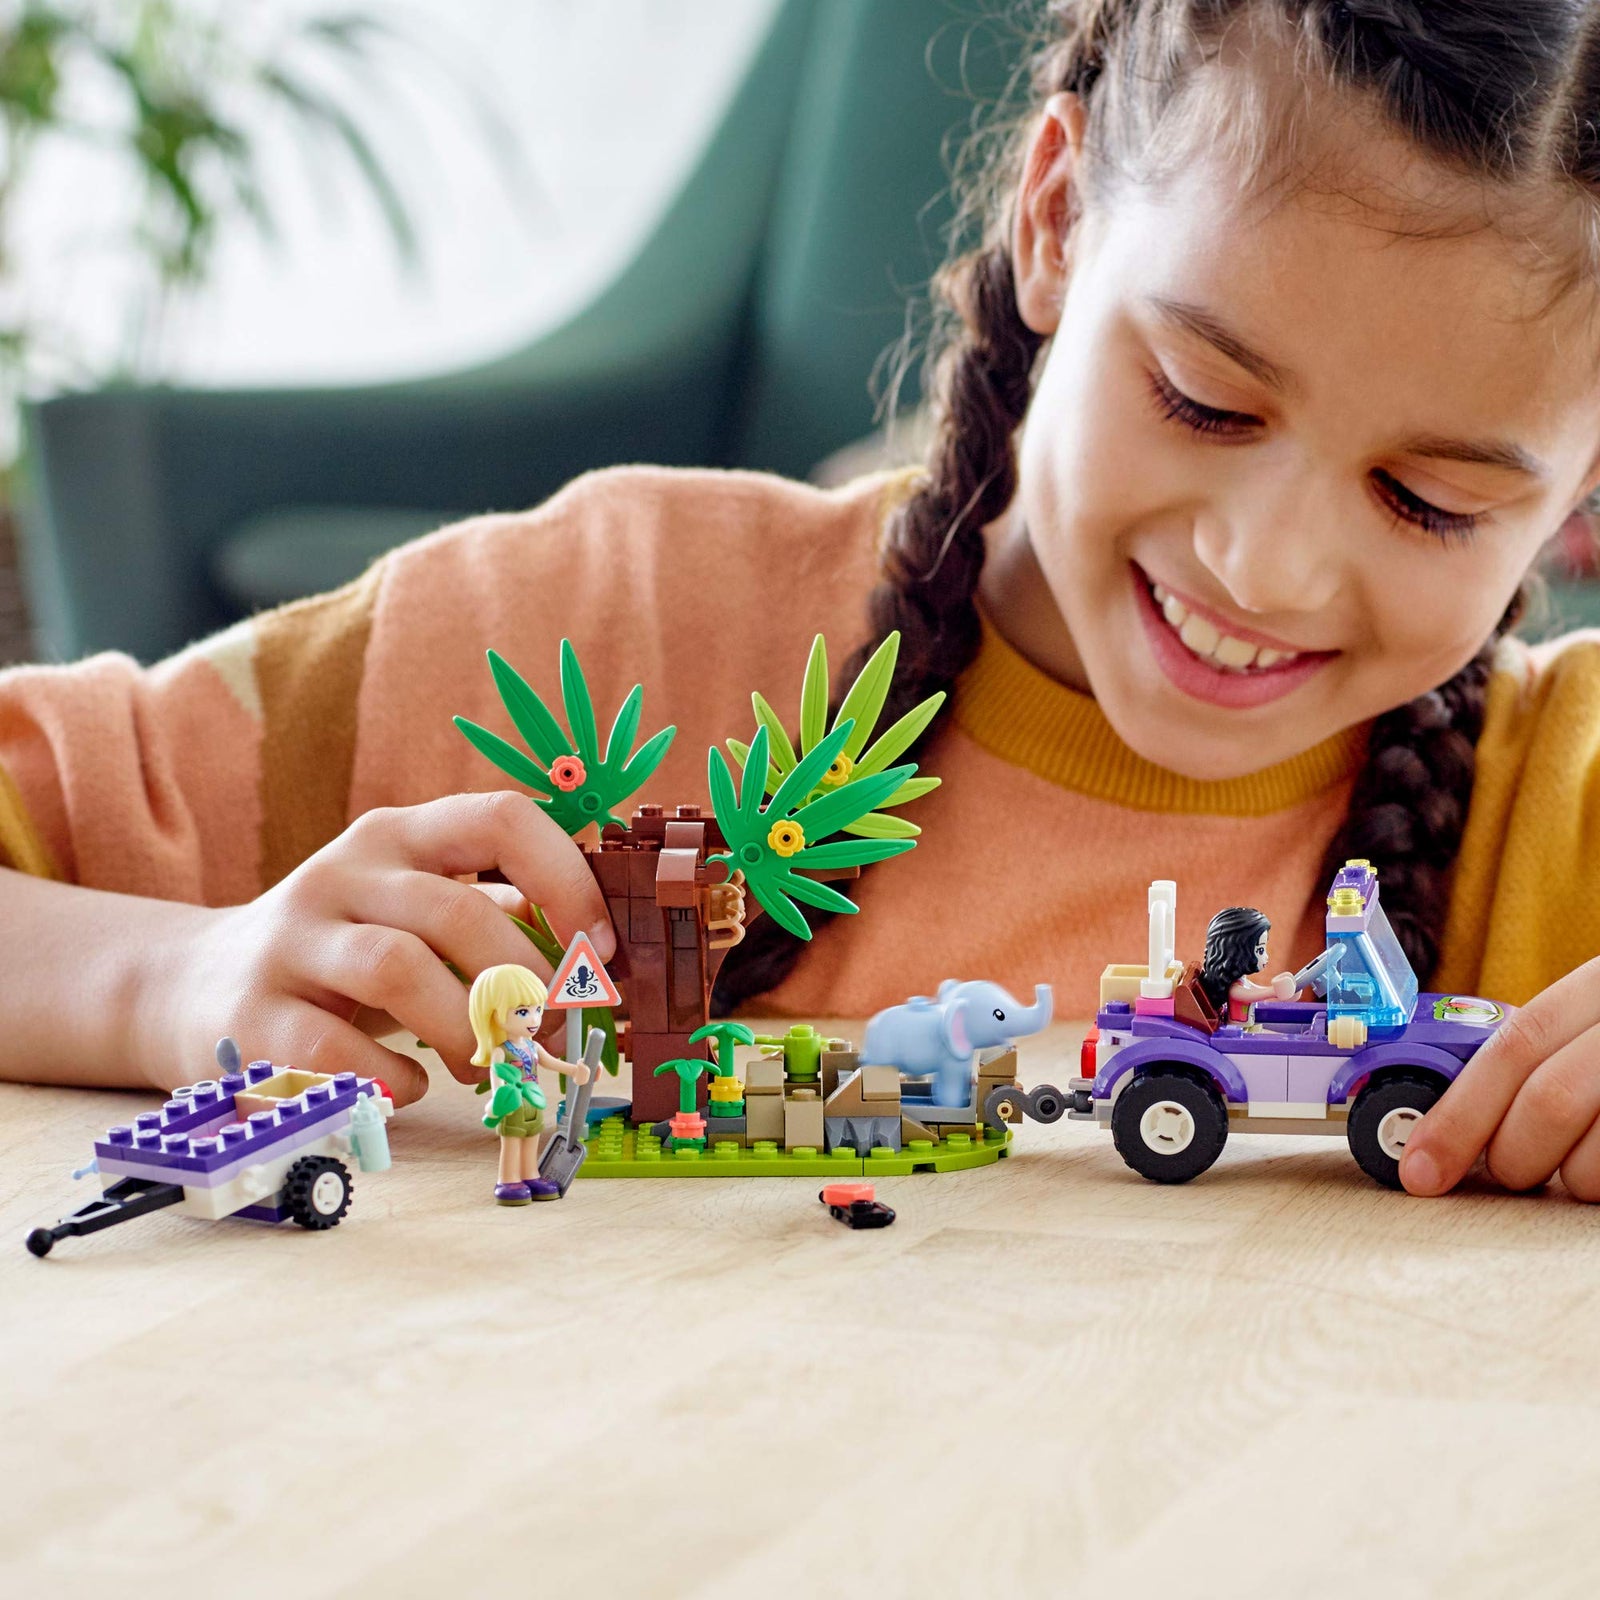 LEGO Friends Baby Elephant Jungle Rescue 41421 Adventure Building Kit; Animal Rescue Playset That Comes with a Toy Truck and Trailer, Plus Friends Emma and Stephanie (203 Pieces)